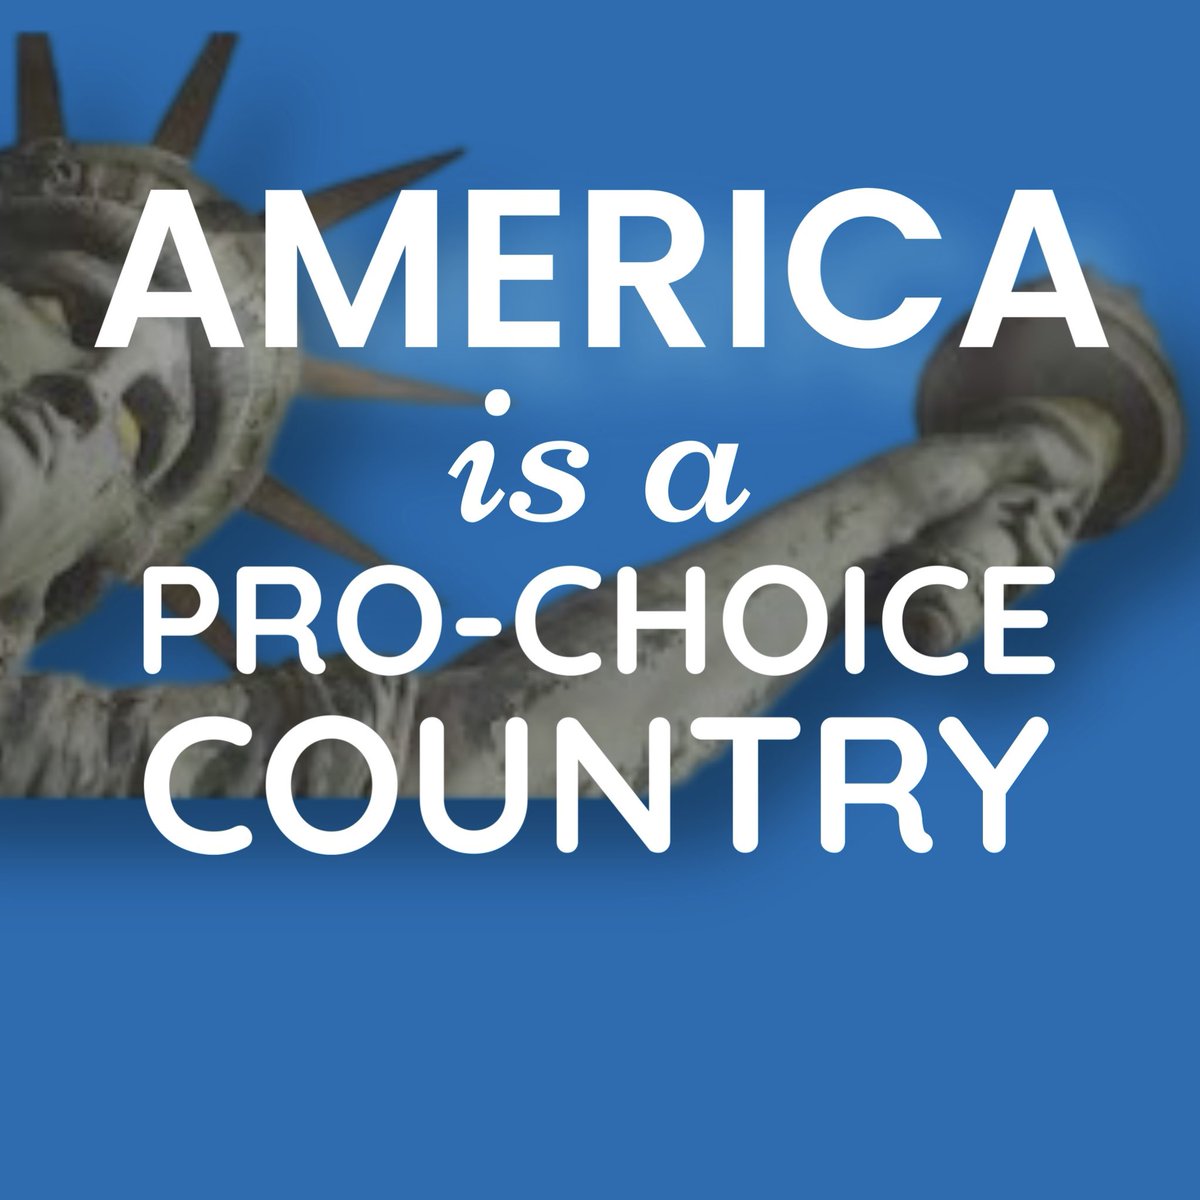 @Analisa_Swan America is Pro-Choice It's time to stand up for that and push back on extremists who are hellbent on banning abortions, IVF & contraception